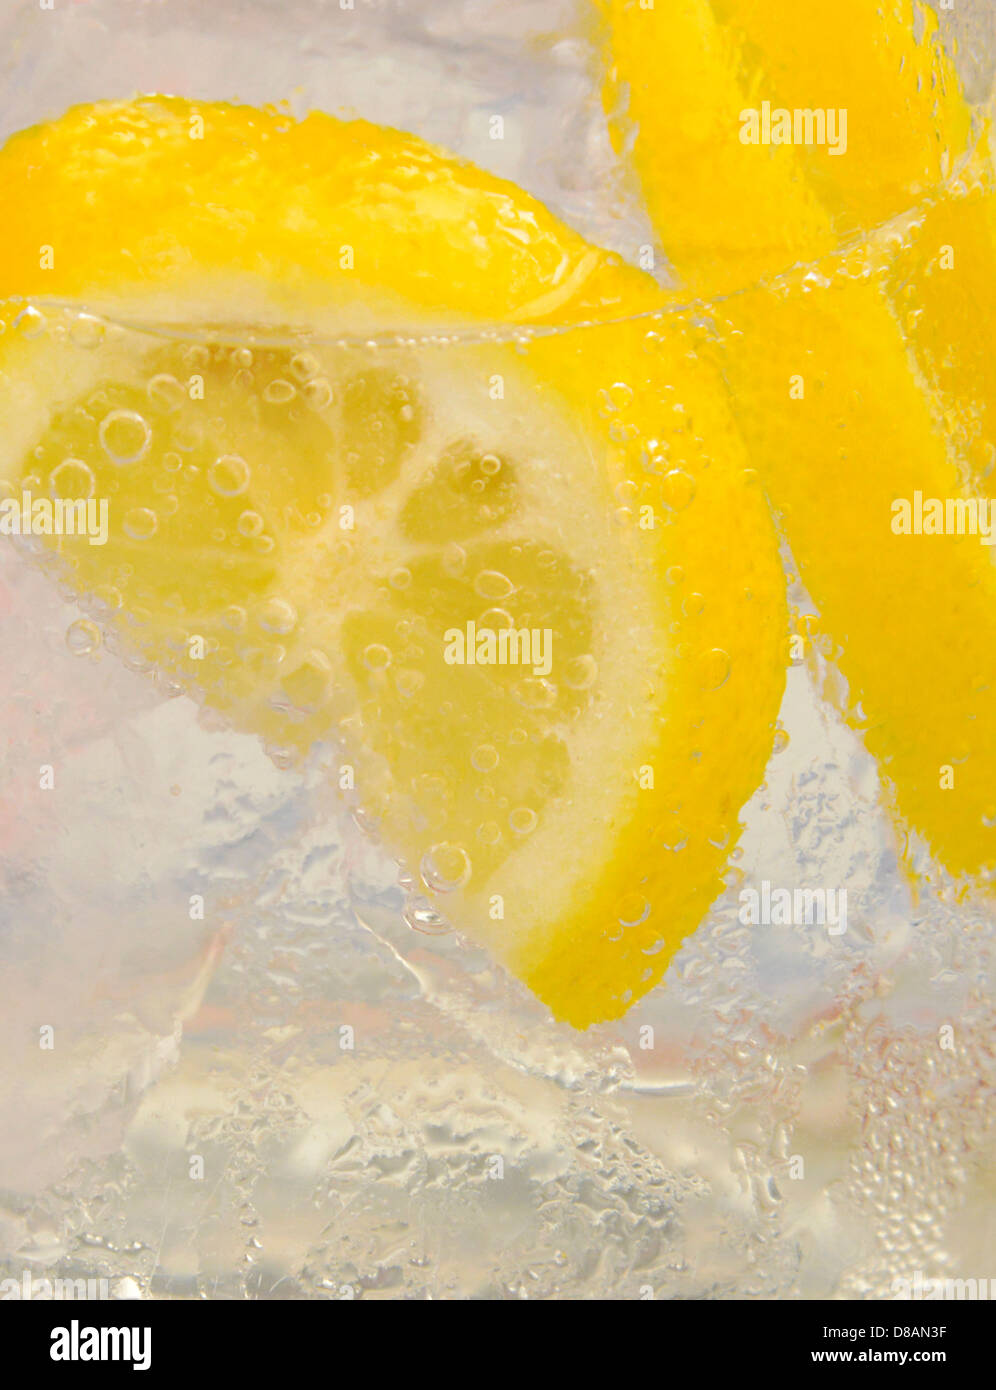 Lemon slices in cold water, Formentera, Balearic Islands, Spain Stock Photo